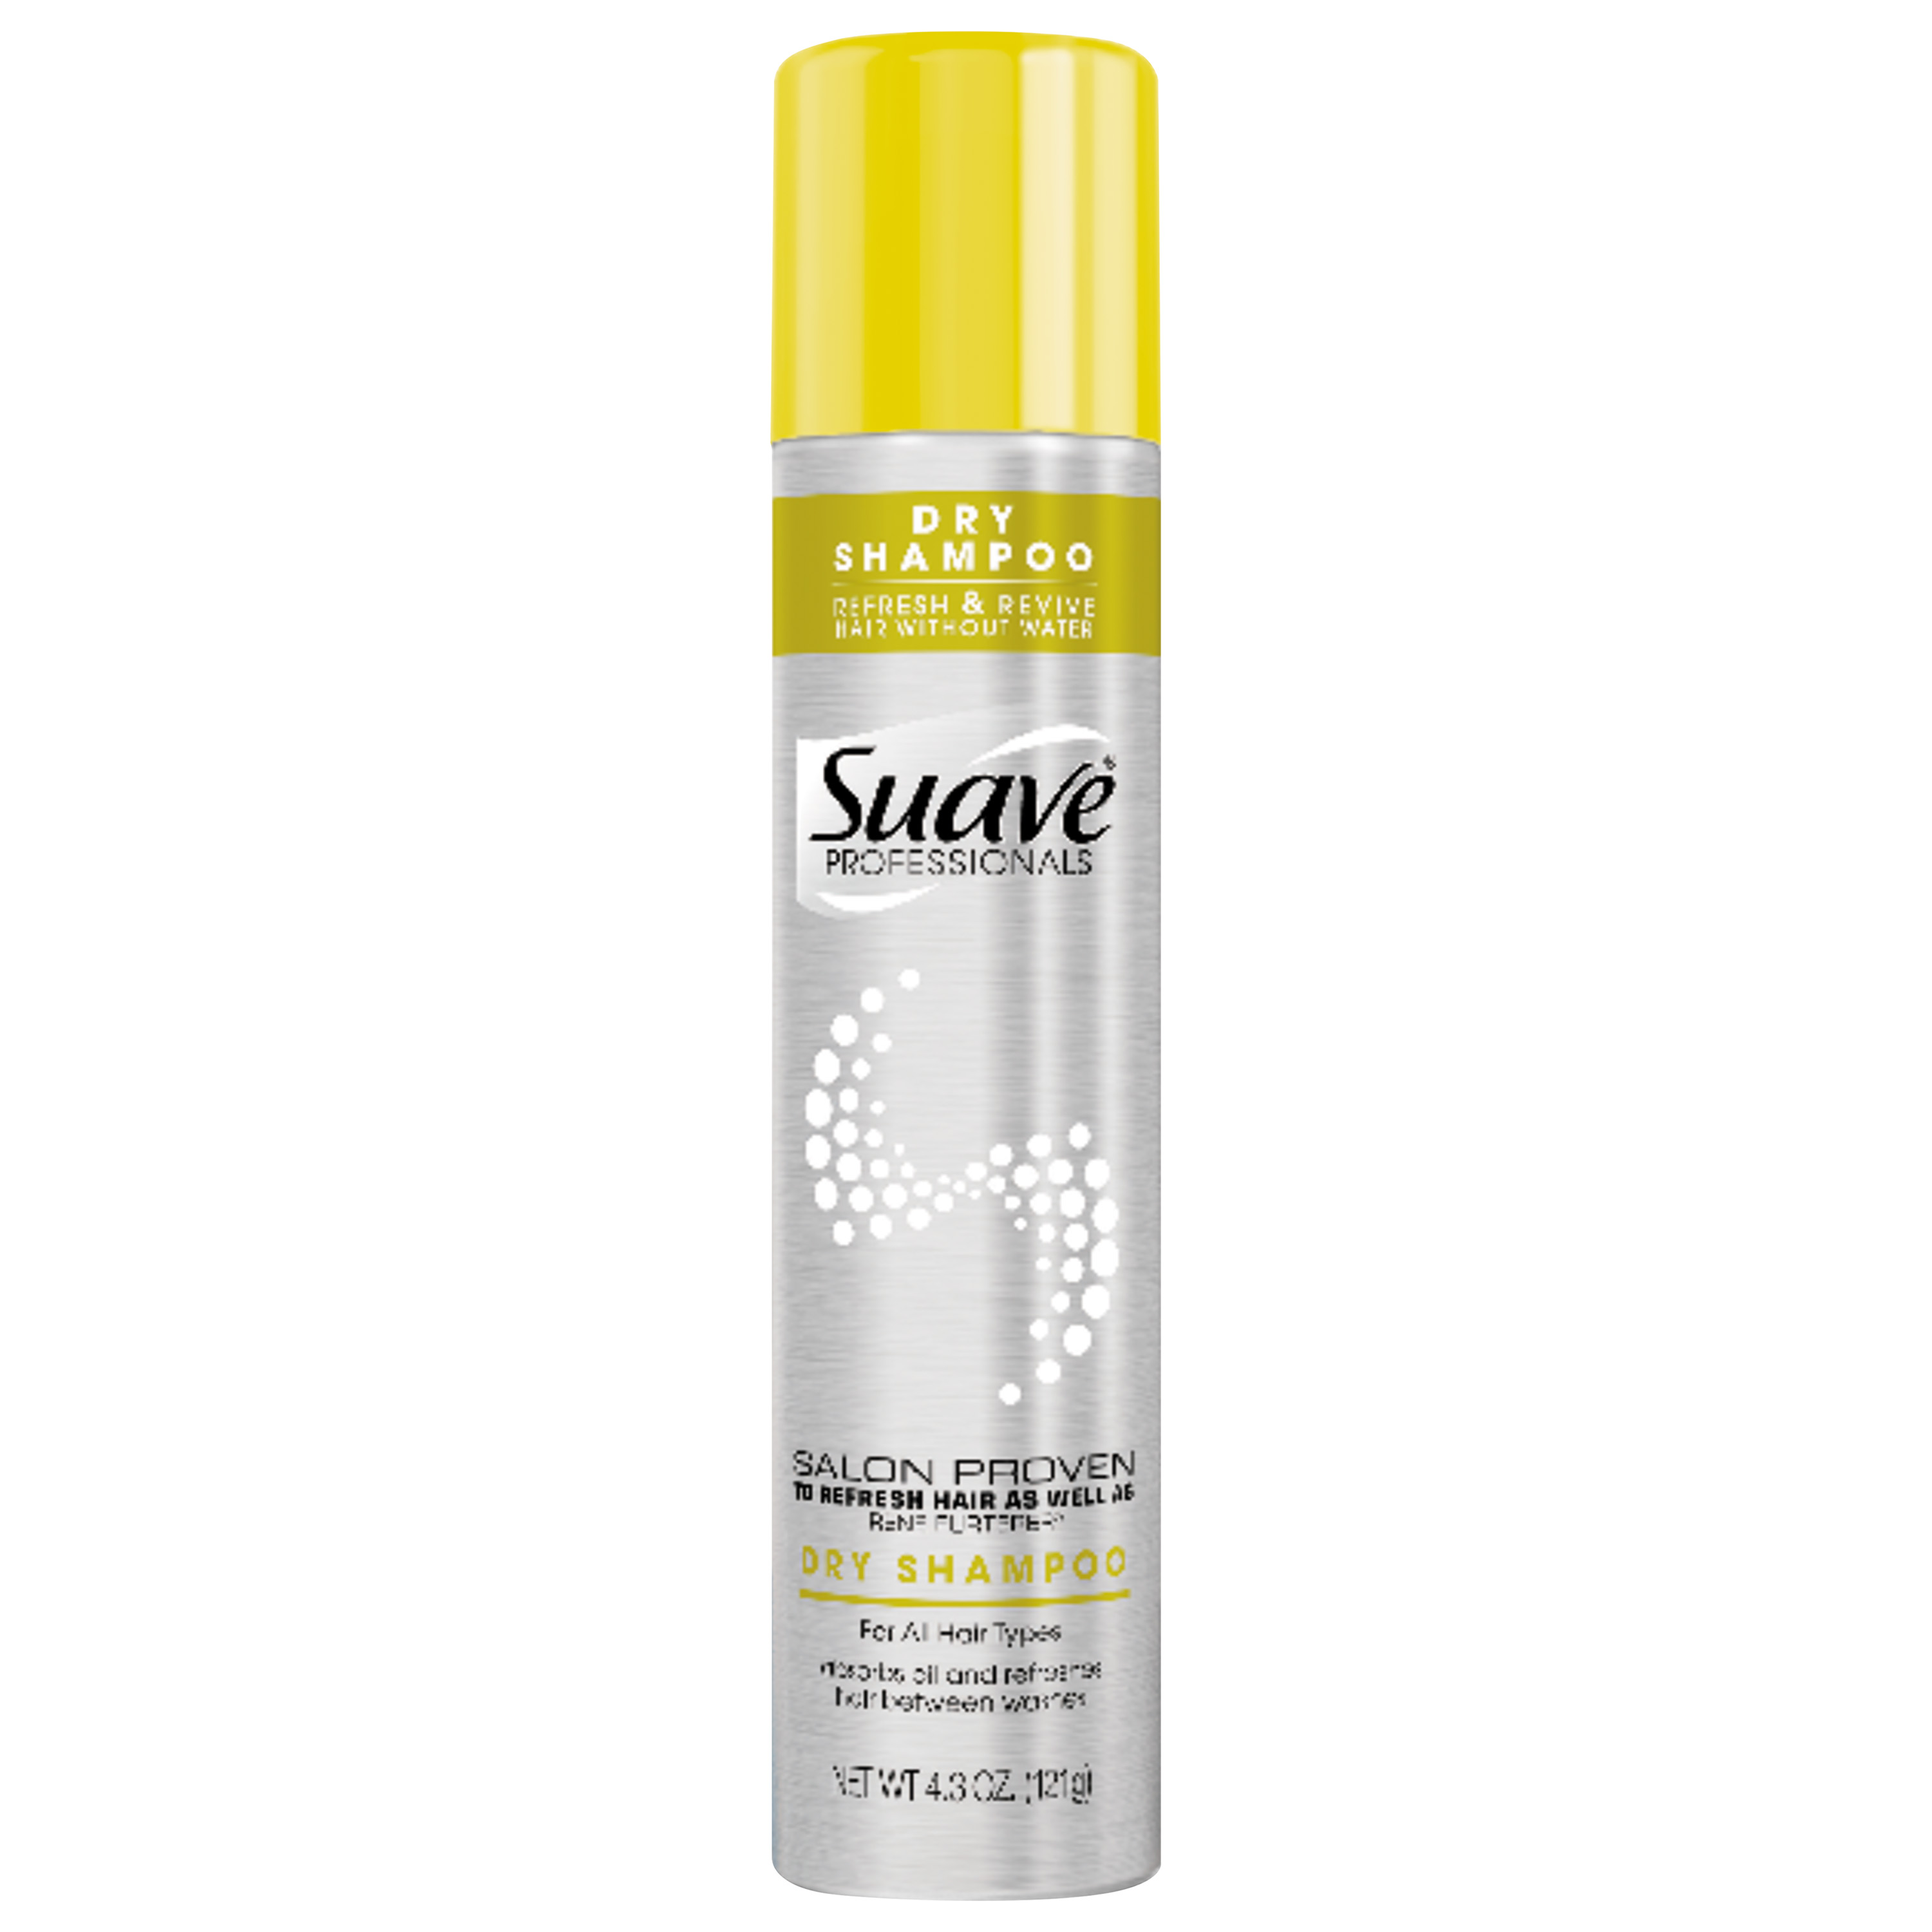 Suave Professionals Dry Shampoo Refresh and Revive 4.3 oz - image 1 of 4